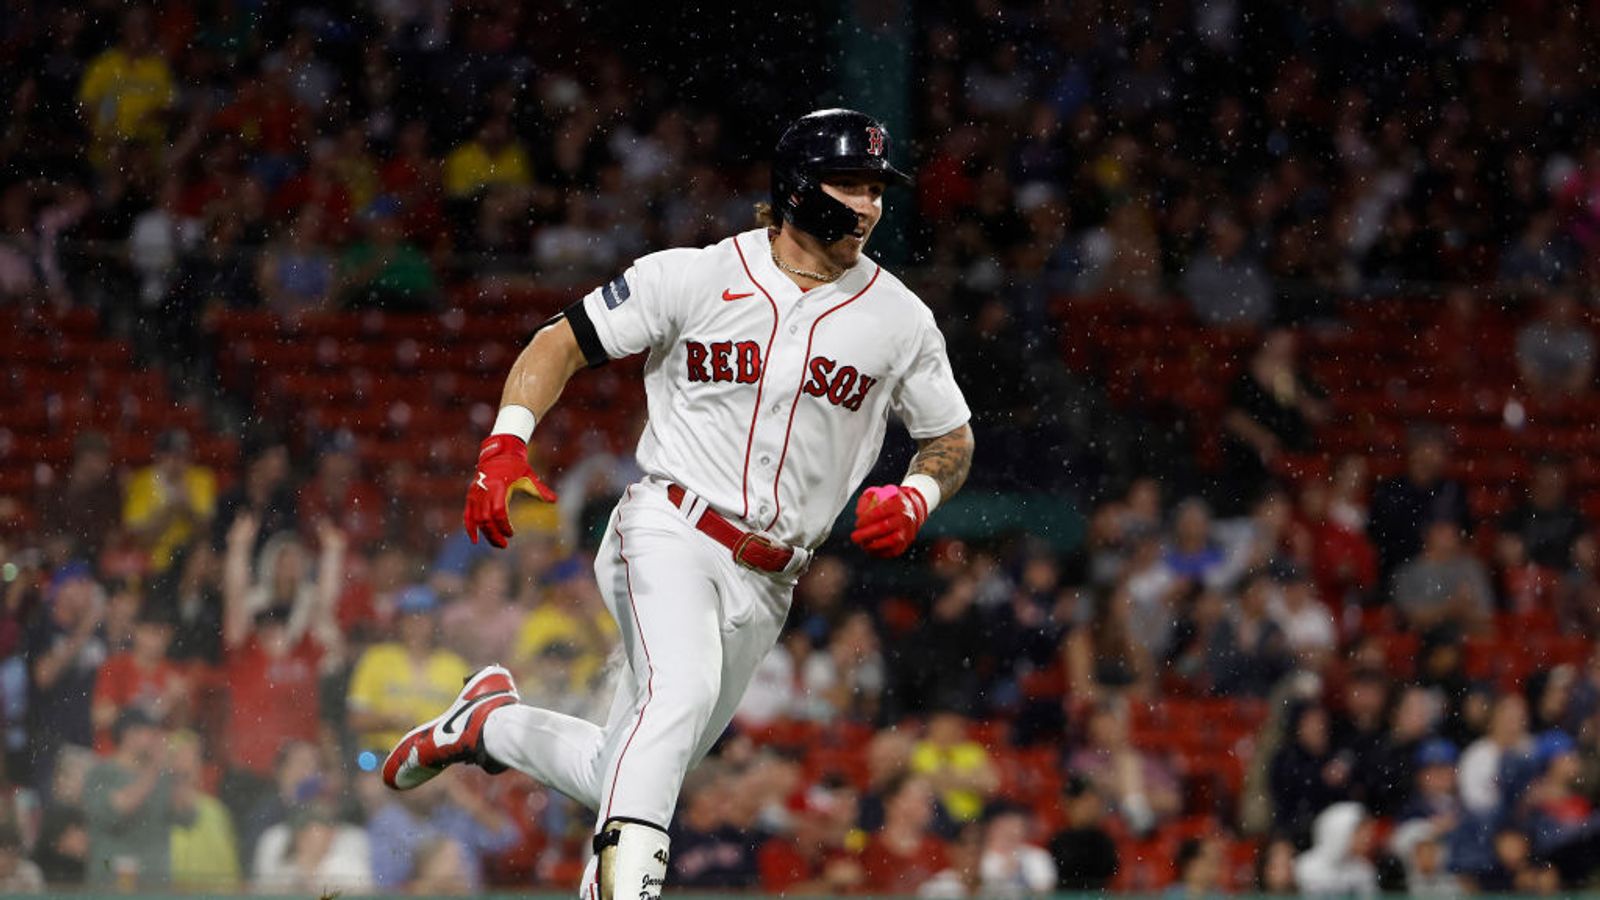 Red Sox beat Rays, win eighth straight on Fourth of July